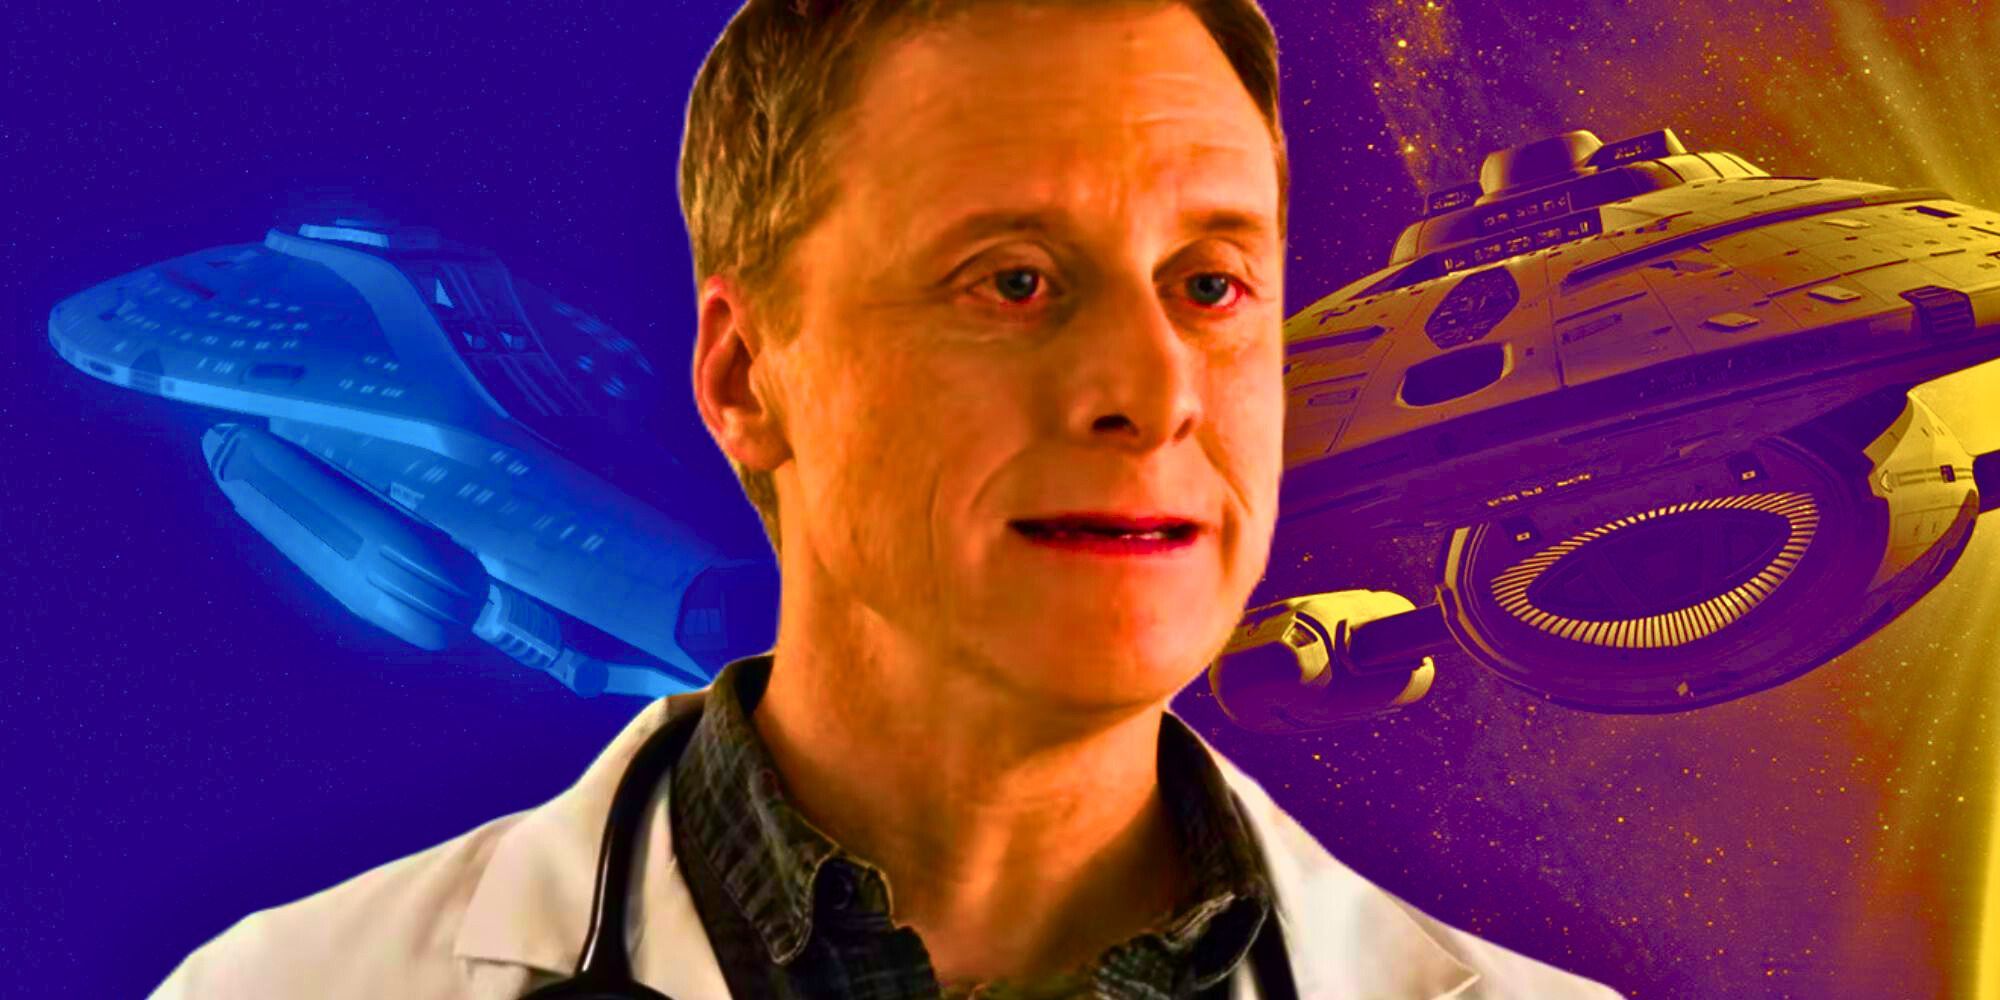 A custom image of Alan Tudyk as Harry Vanderspeigle from Resident Alien against a backdrop of imagery from Star Trek: Voyager